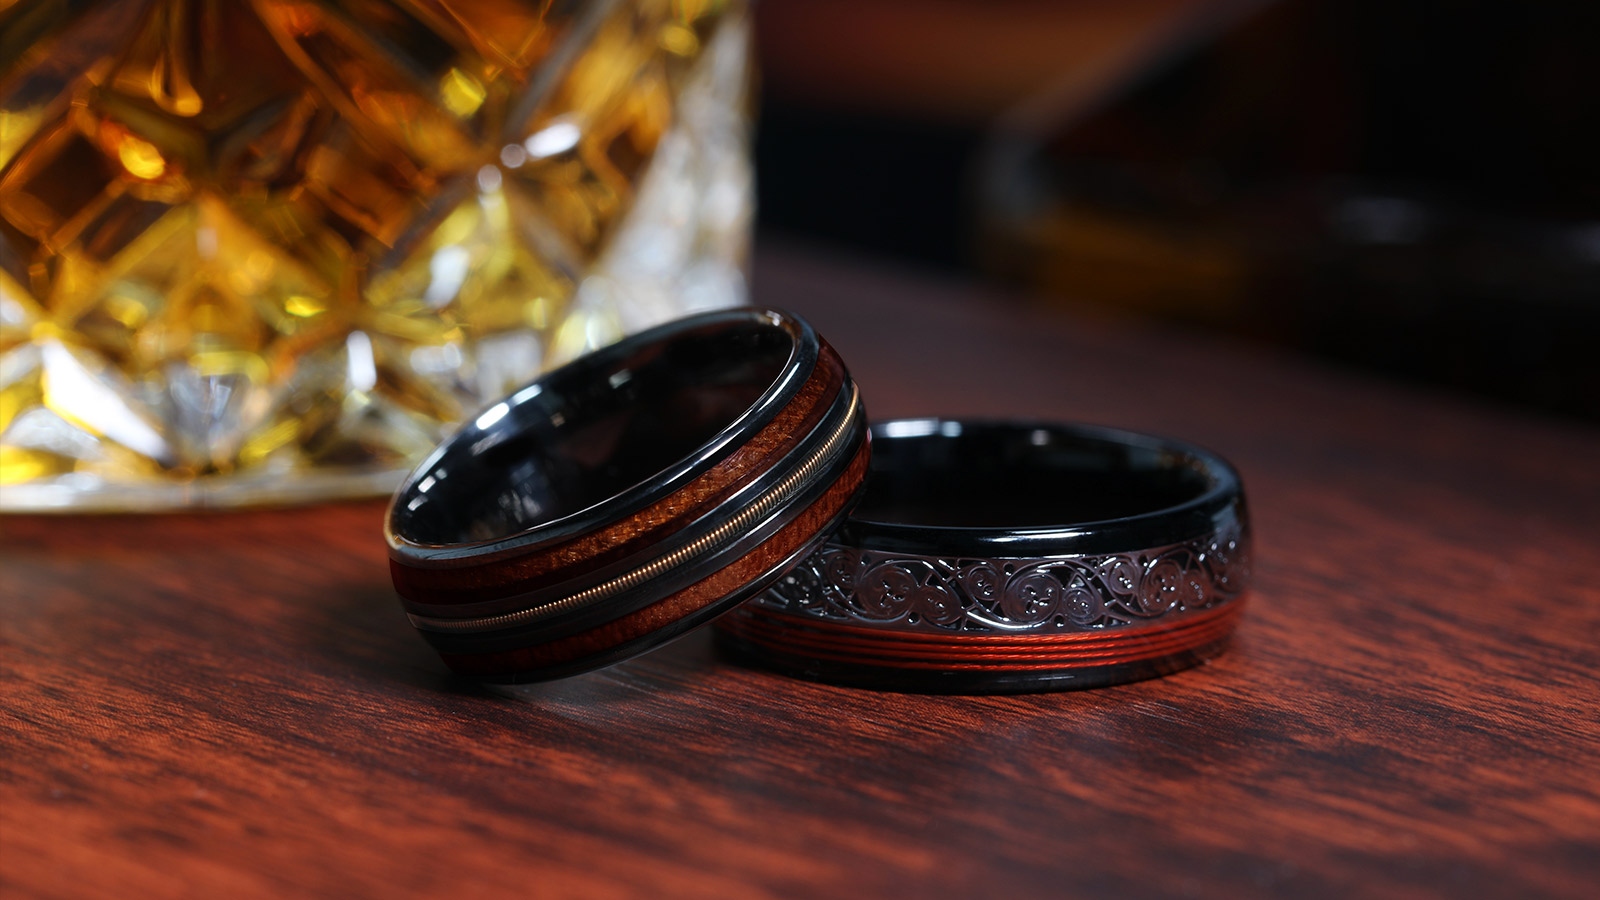 Two men's rings were placed on a wooden table with beer glasses behind them